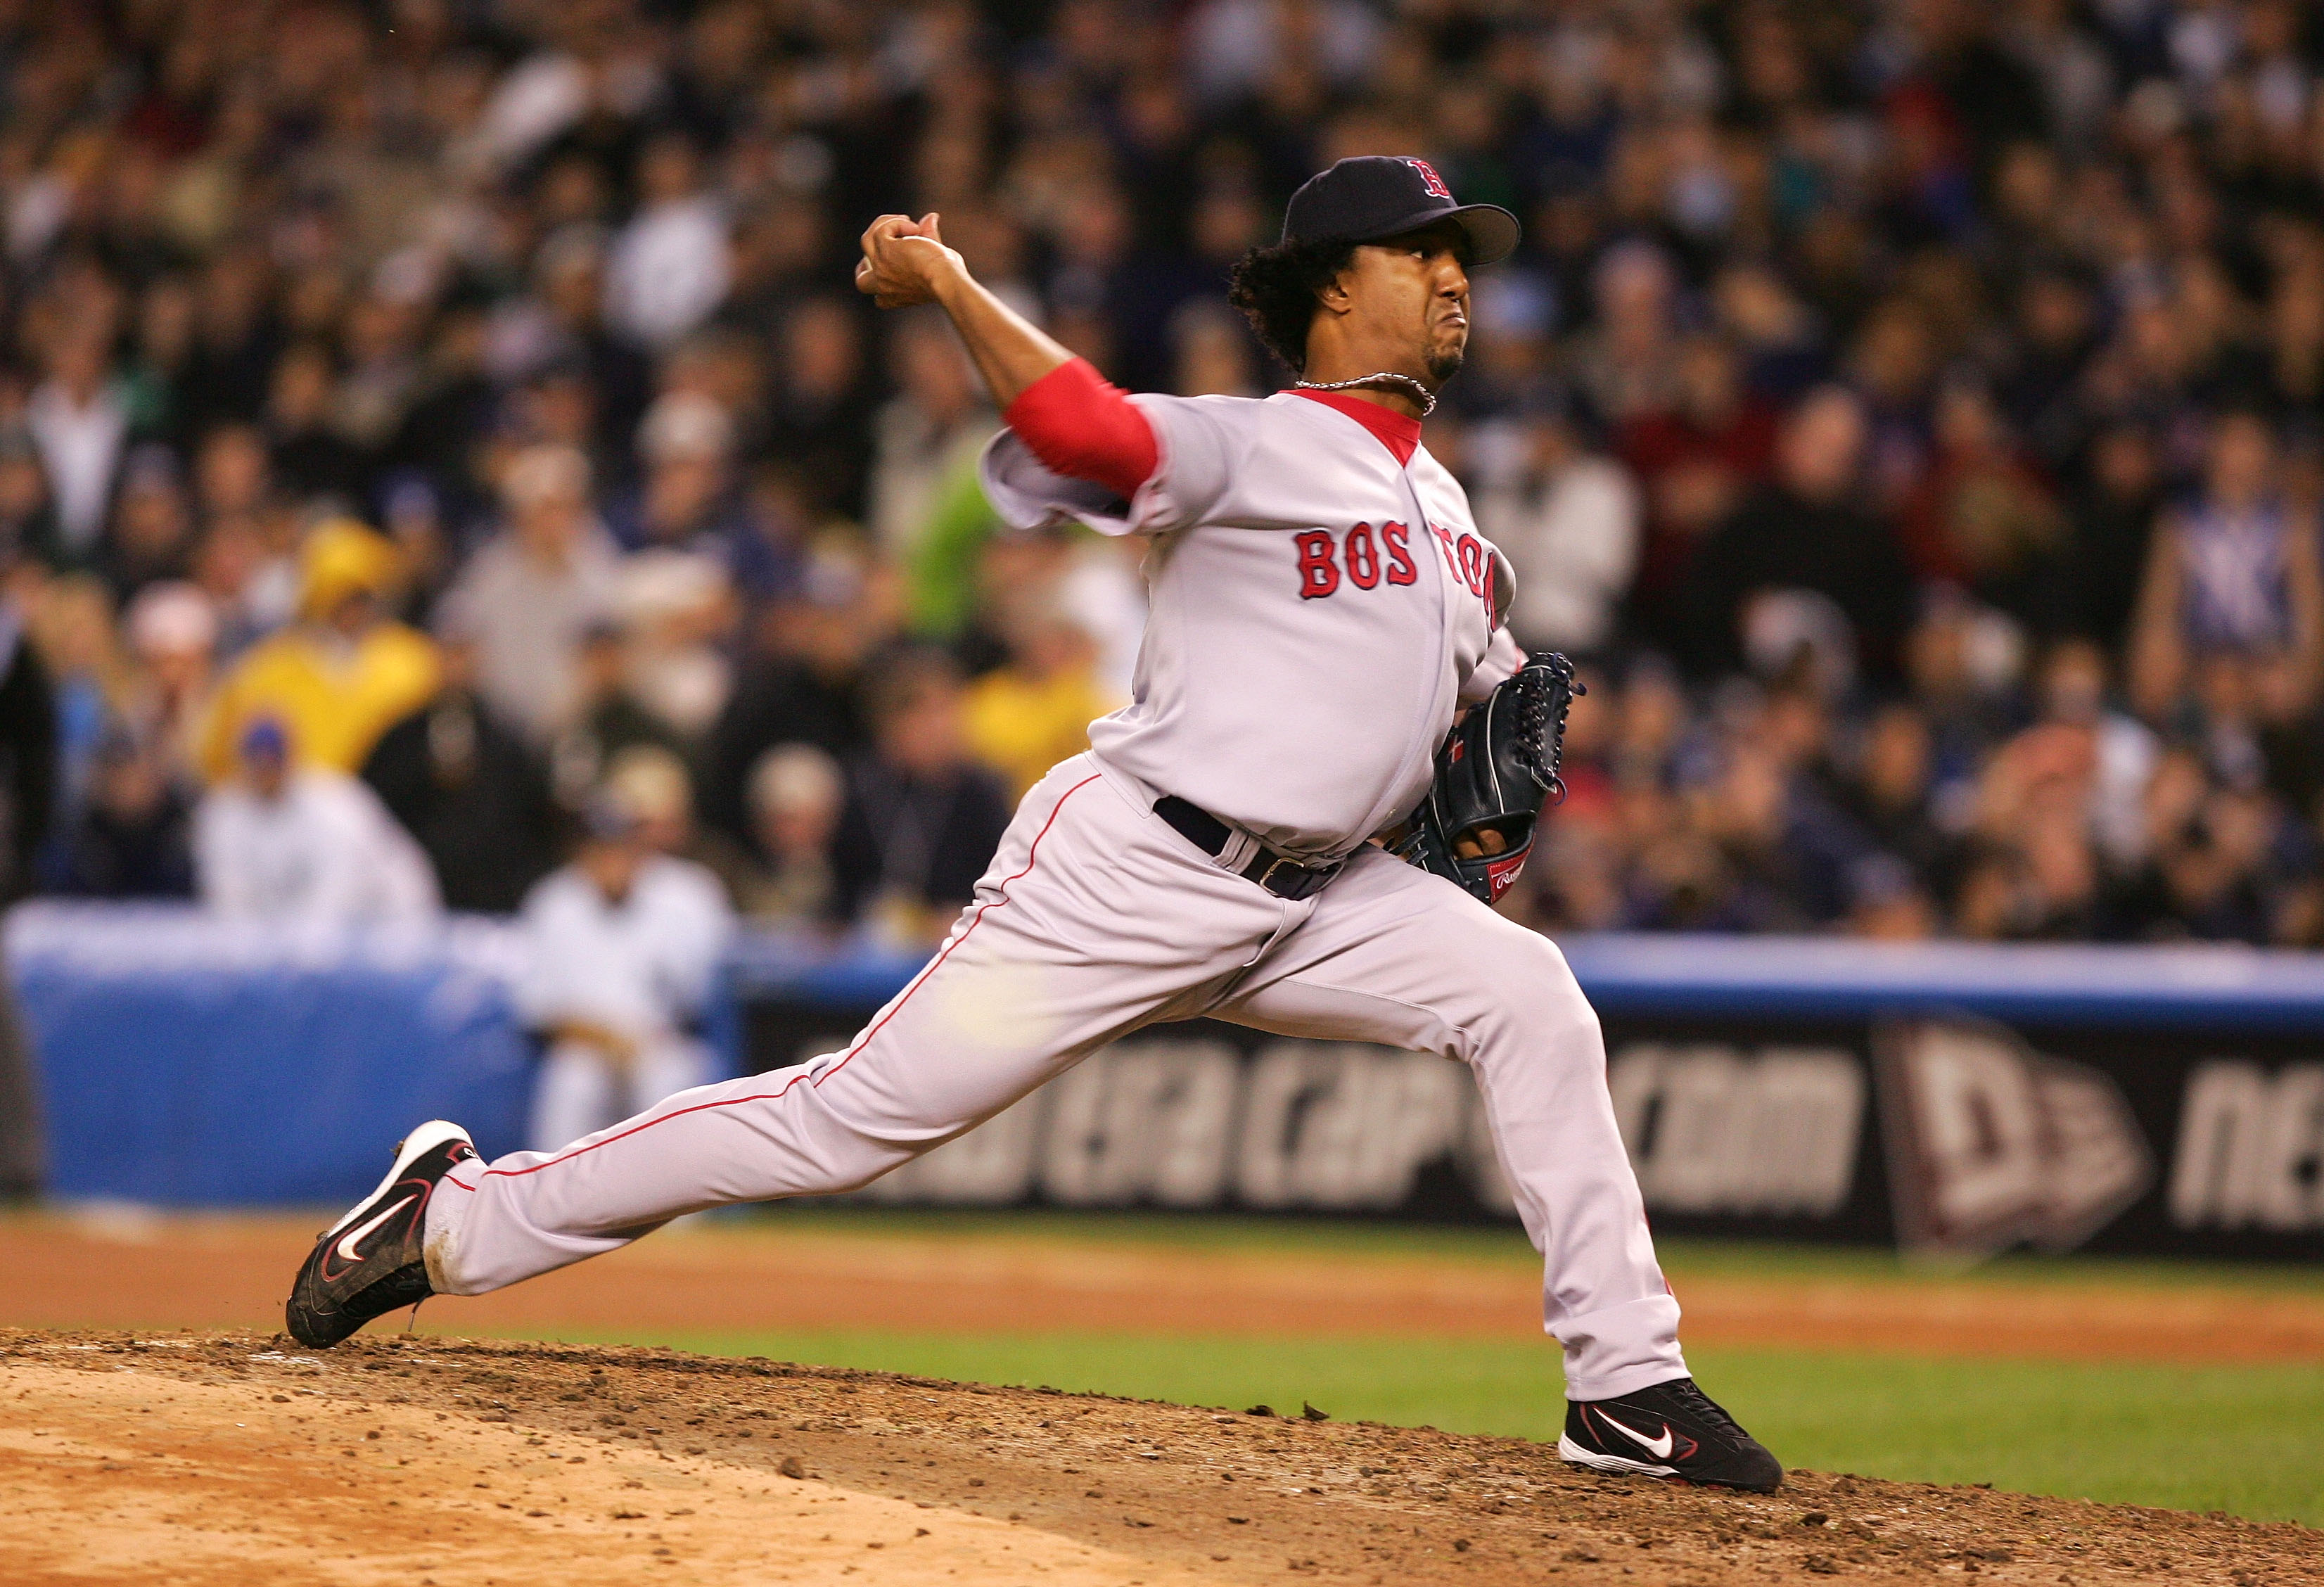 Red Sox legend Pedro Martinez rips skidding Yankees, compares them